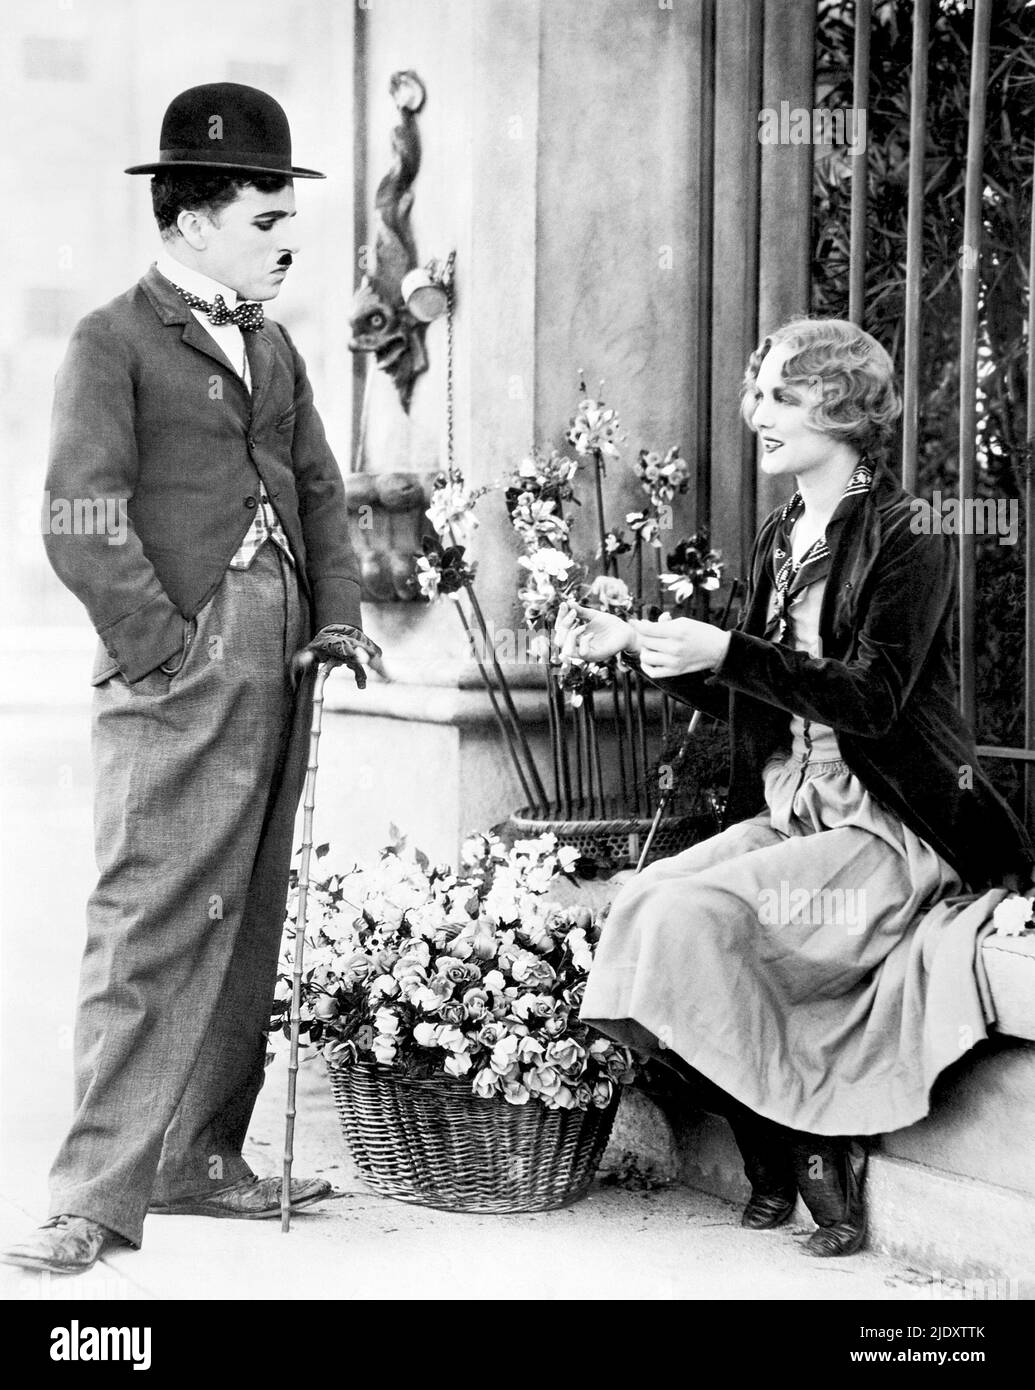 A scene from the Charlei Chaplin film City  Lights in which The Tramp meets the Blind Flower Girl (Virginia Cherrill)  and falls in love. Stock Photo